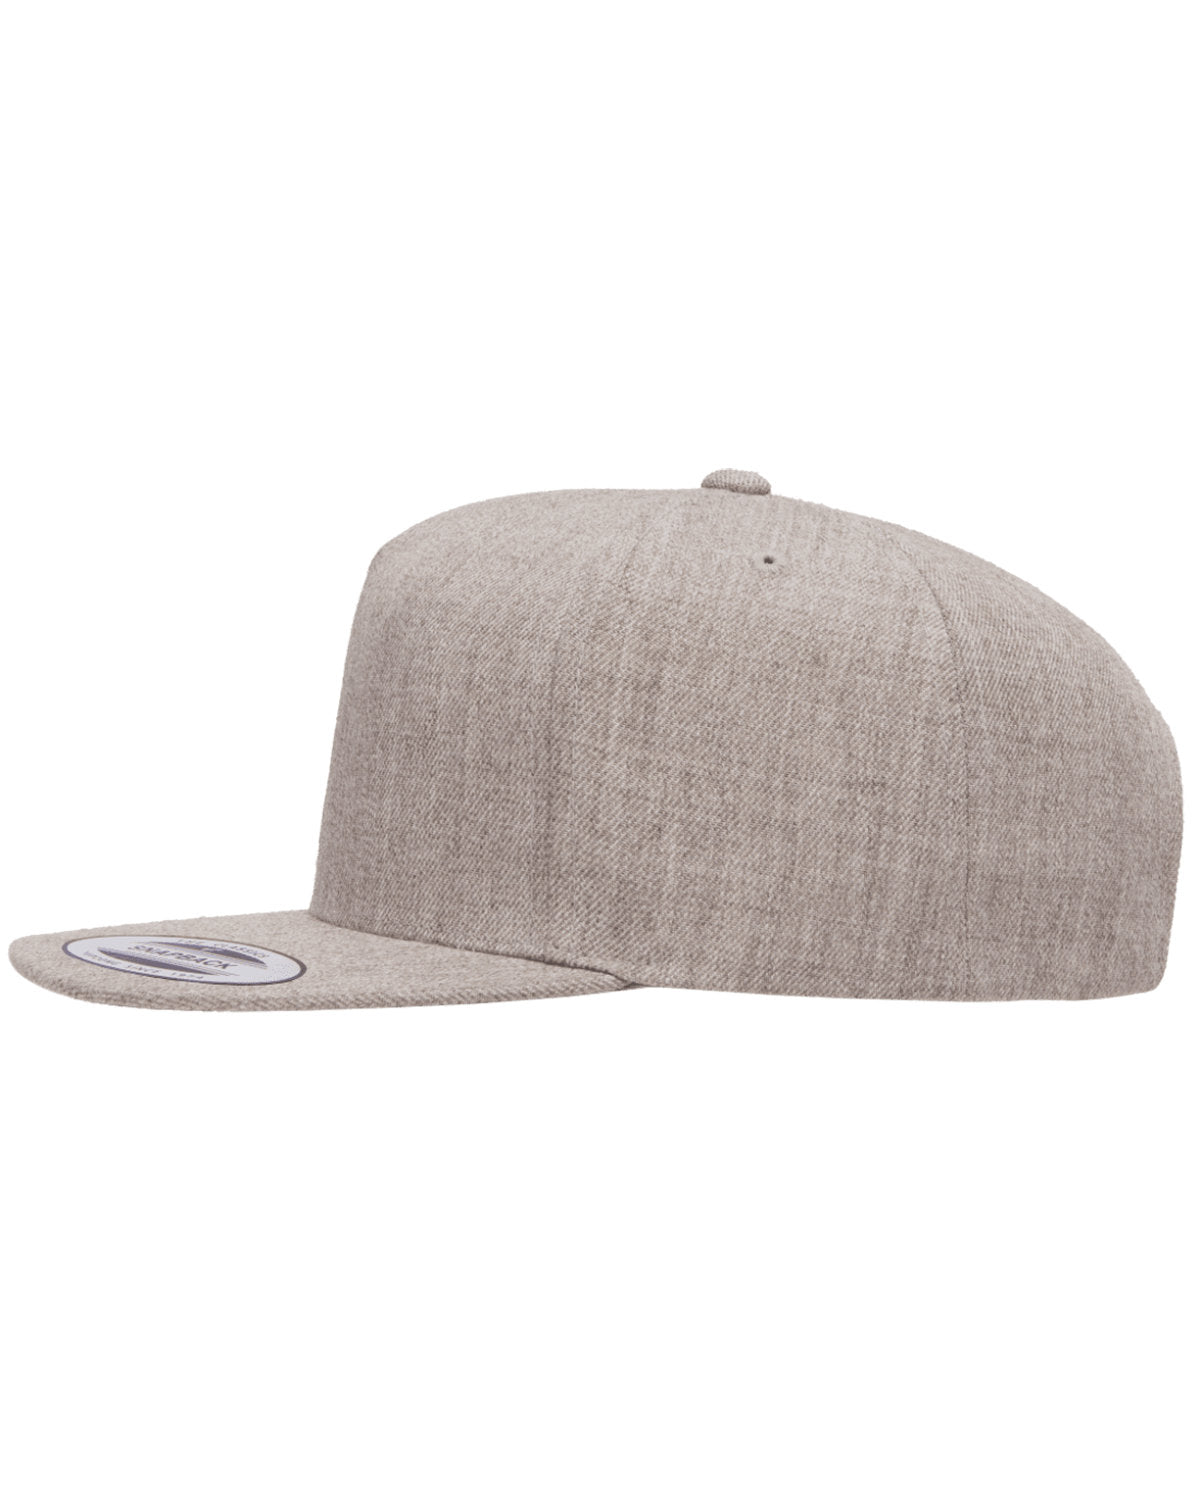 Yupoong 5-Panel Structured FlAthletic Visor Classic Branded Snapback Caps, Heather Grey